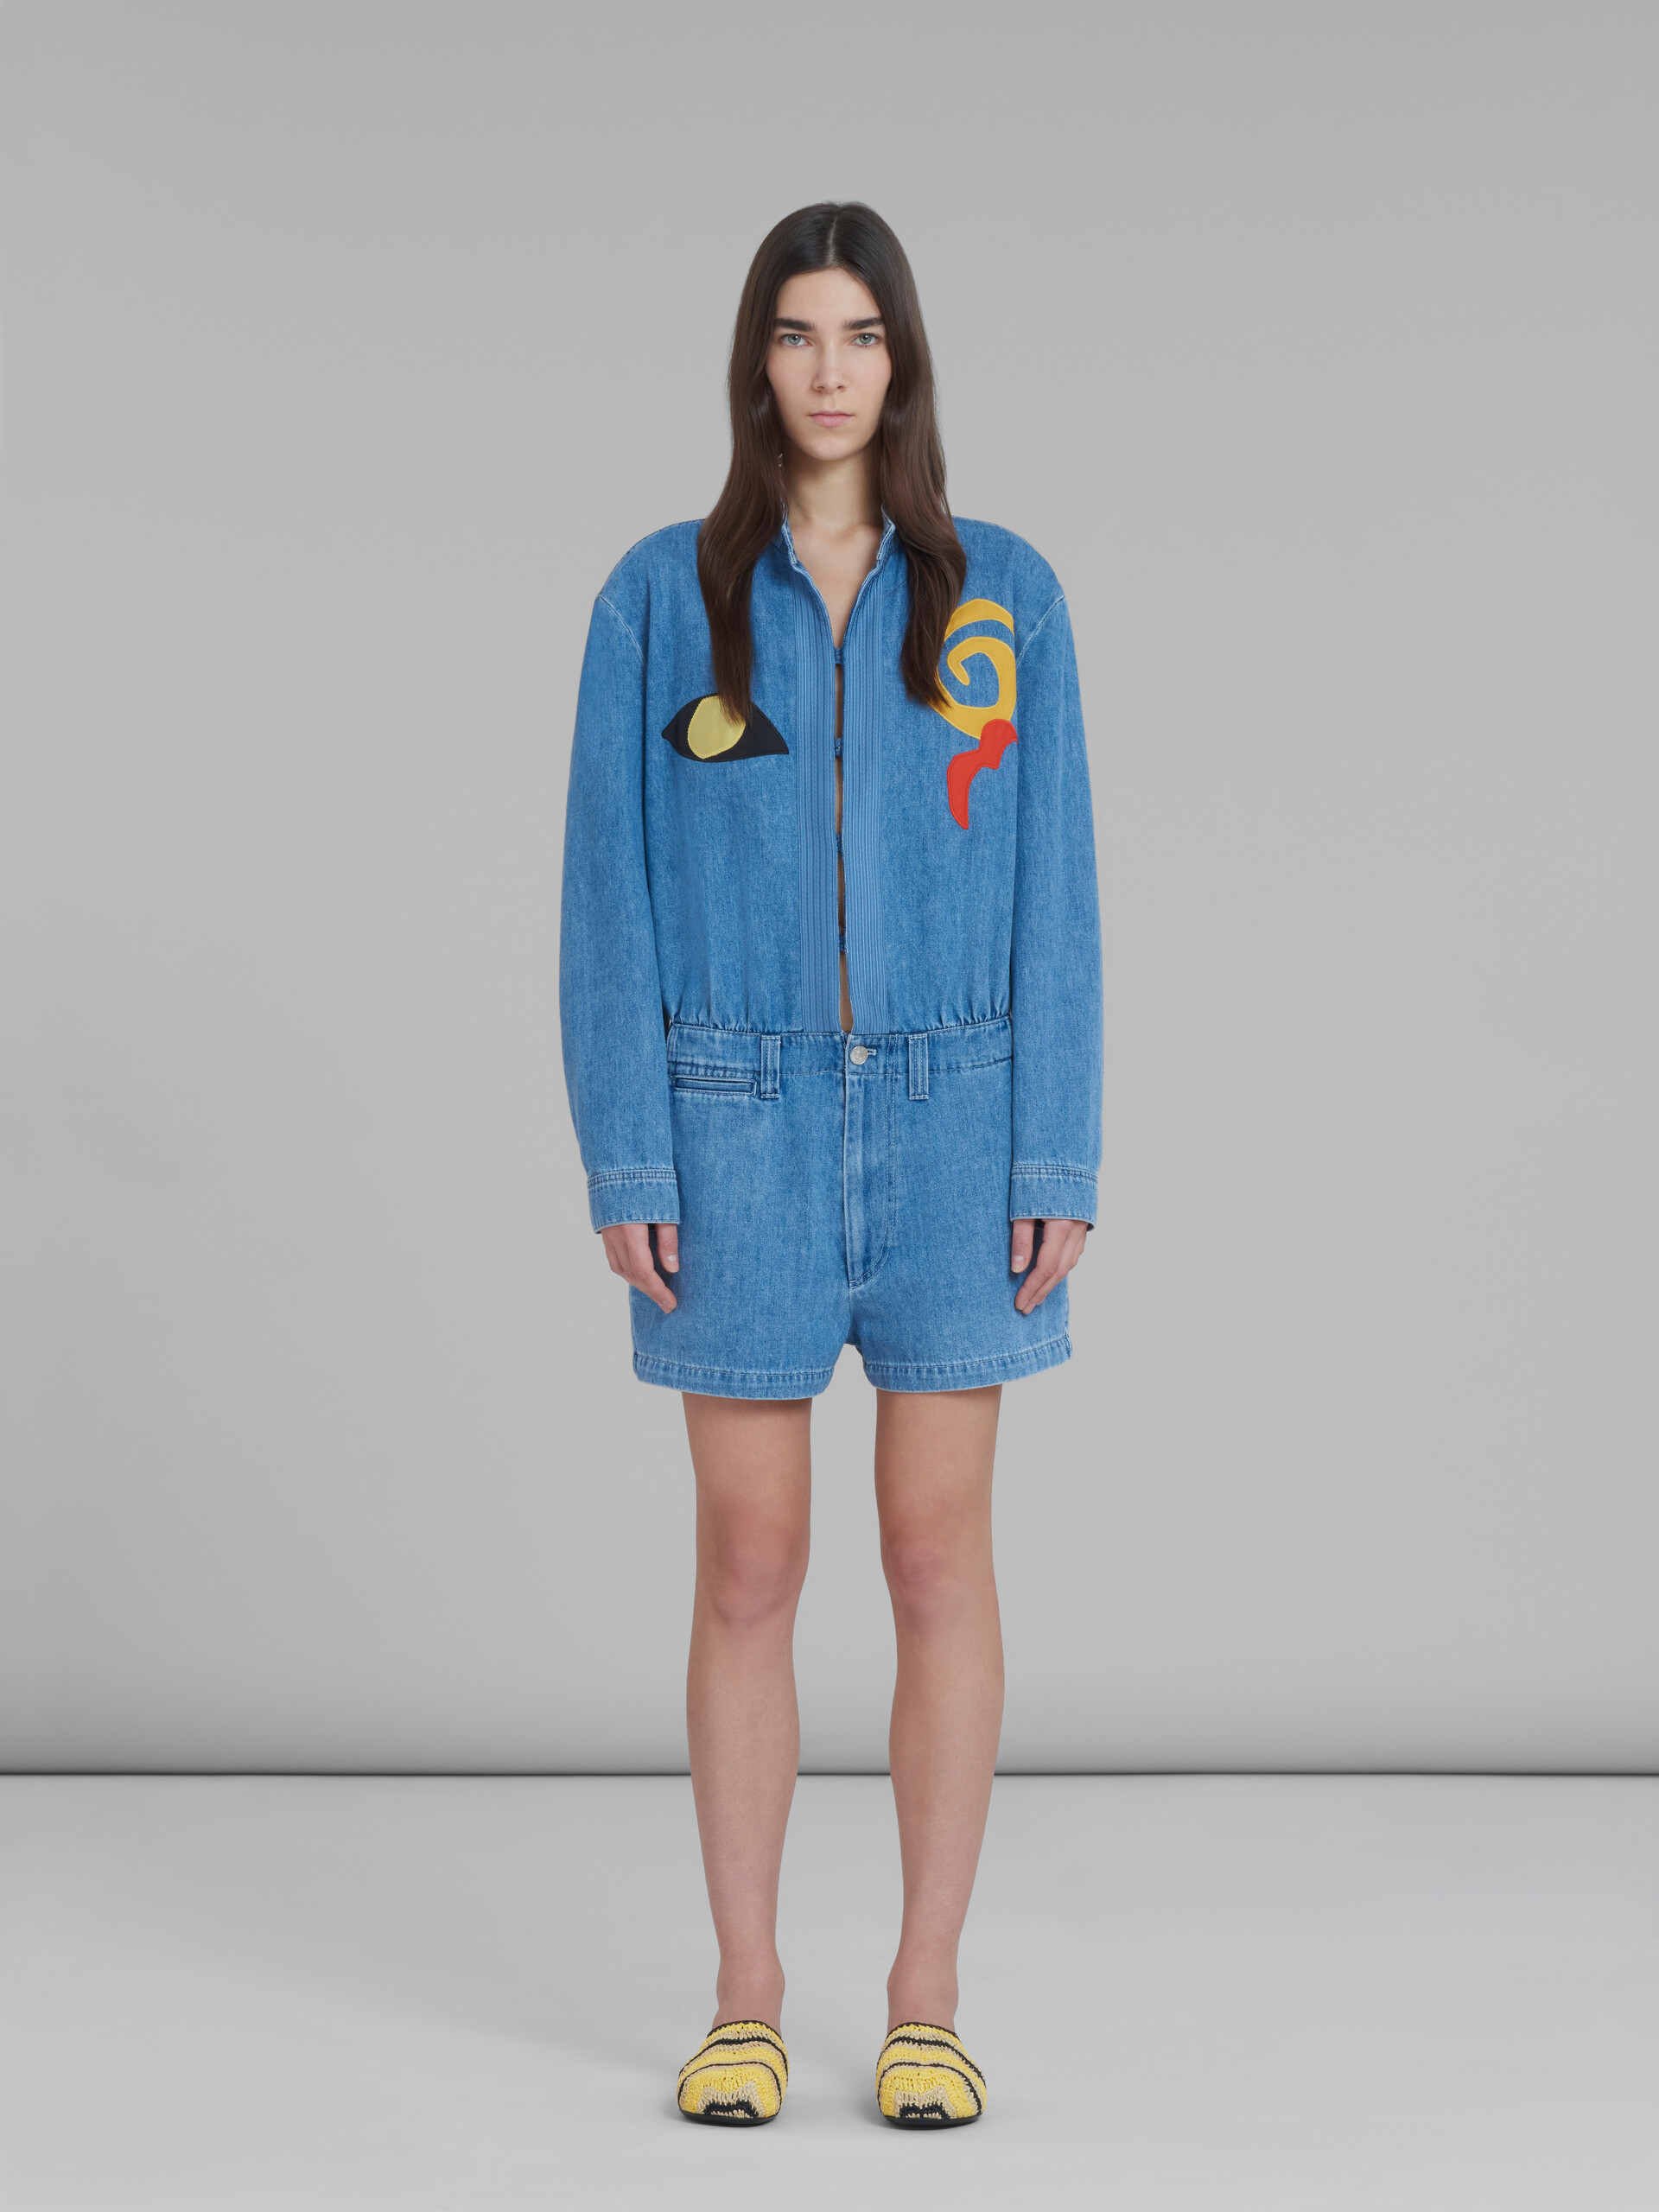 Marni x No Vacancy Inn - Blue chambray jumpsuit with embroidery - Overalls - Image 2